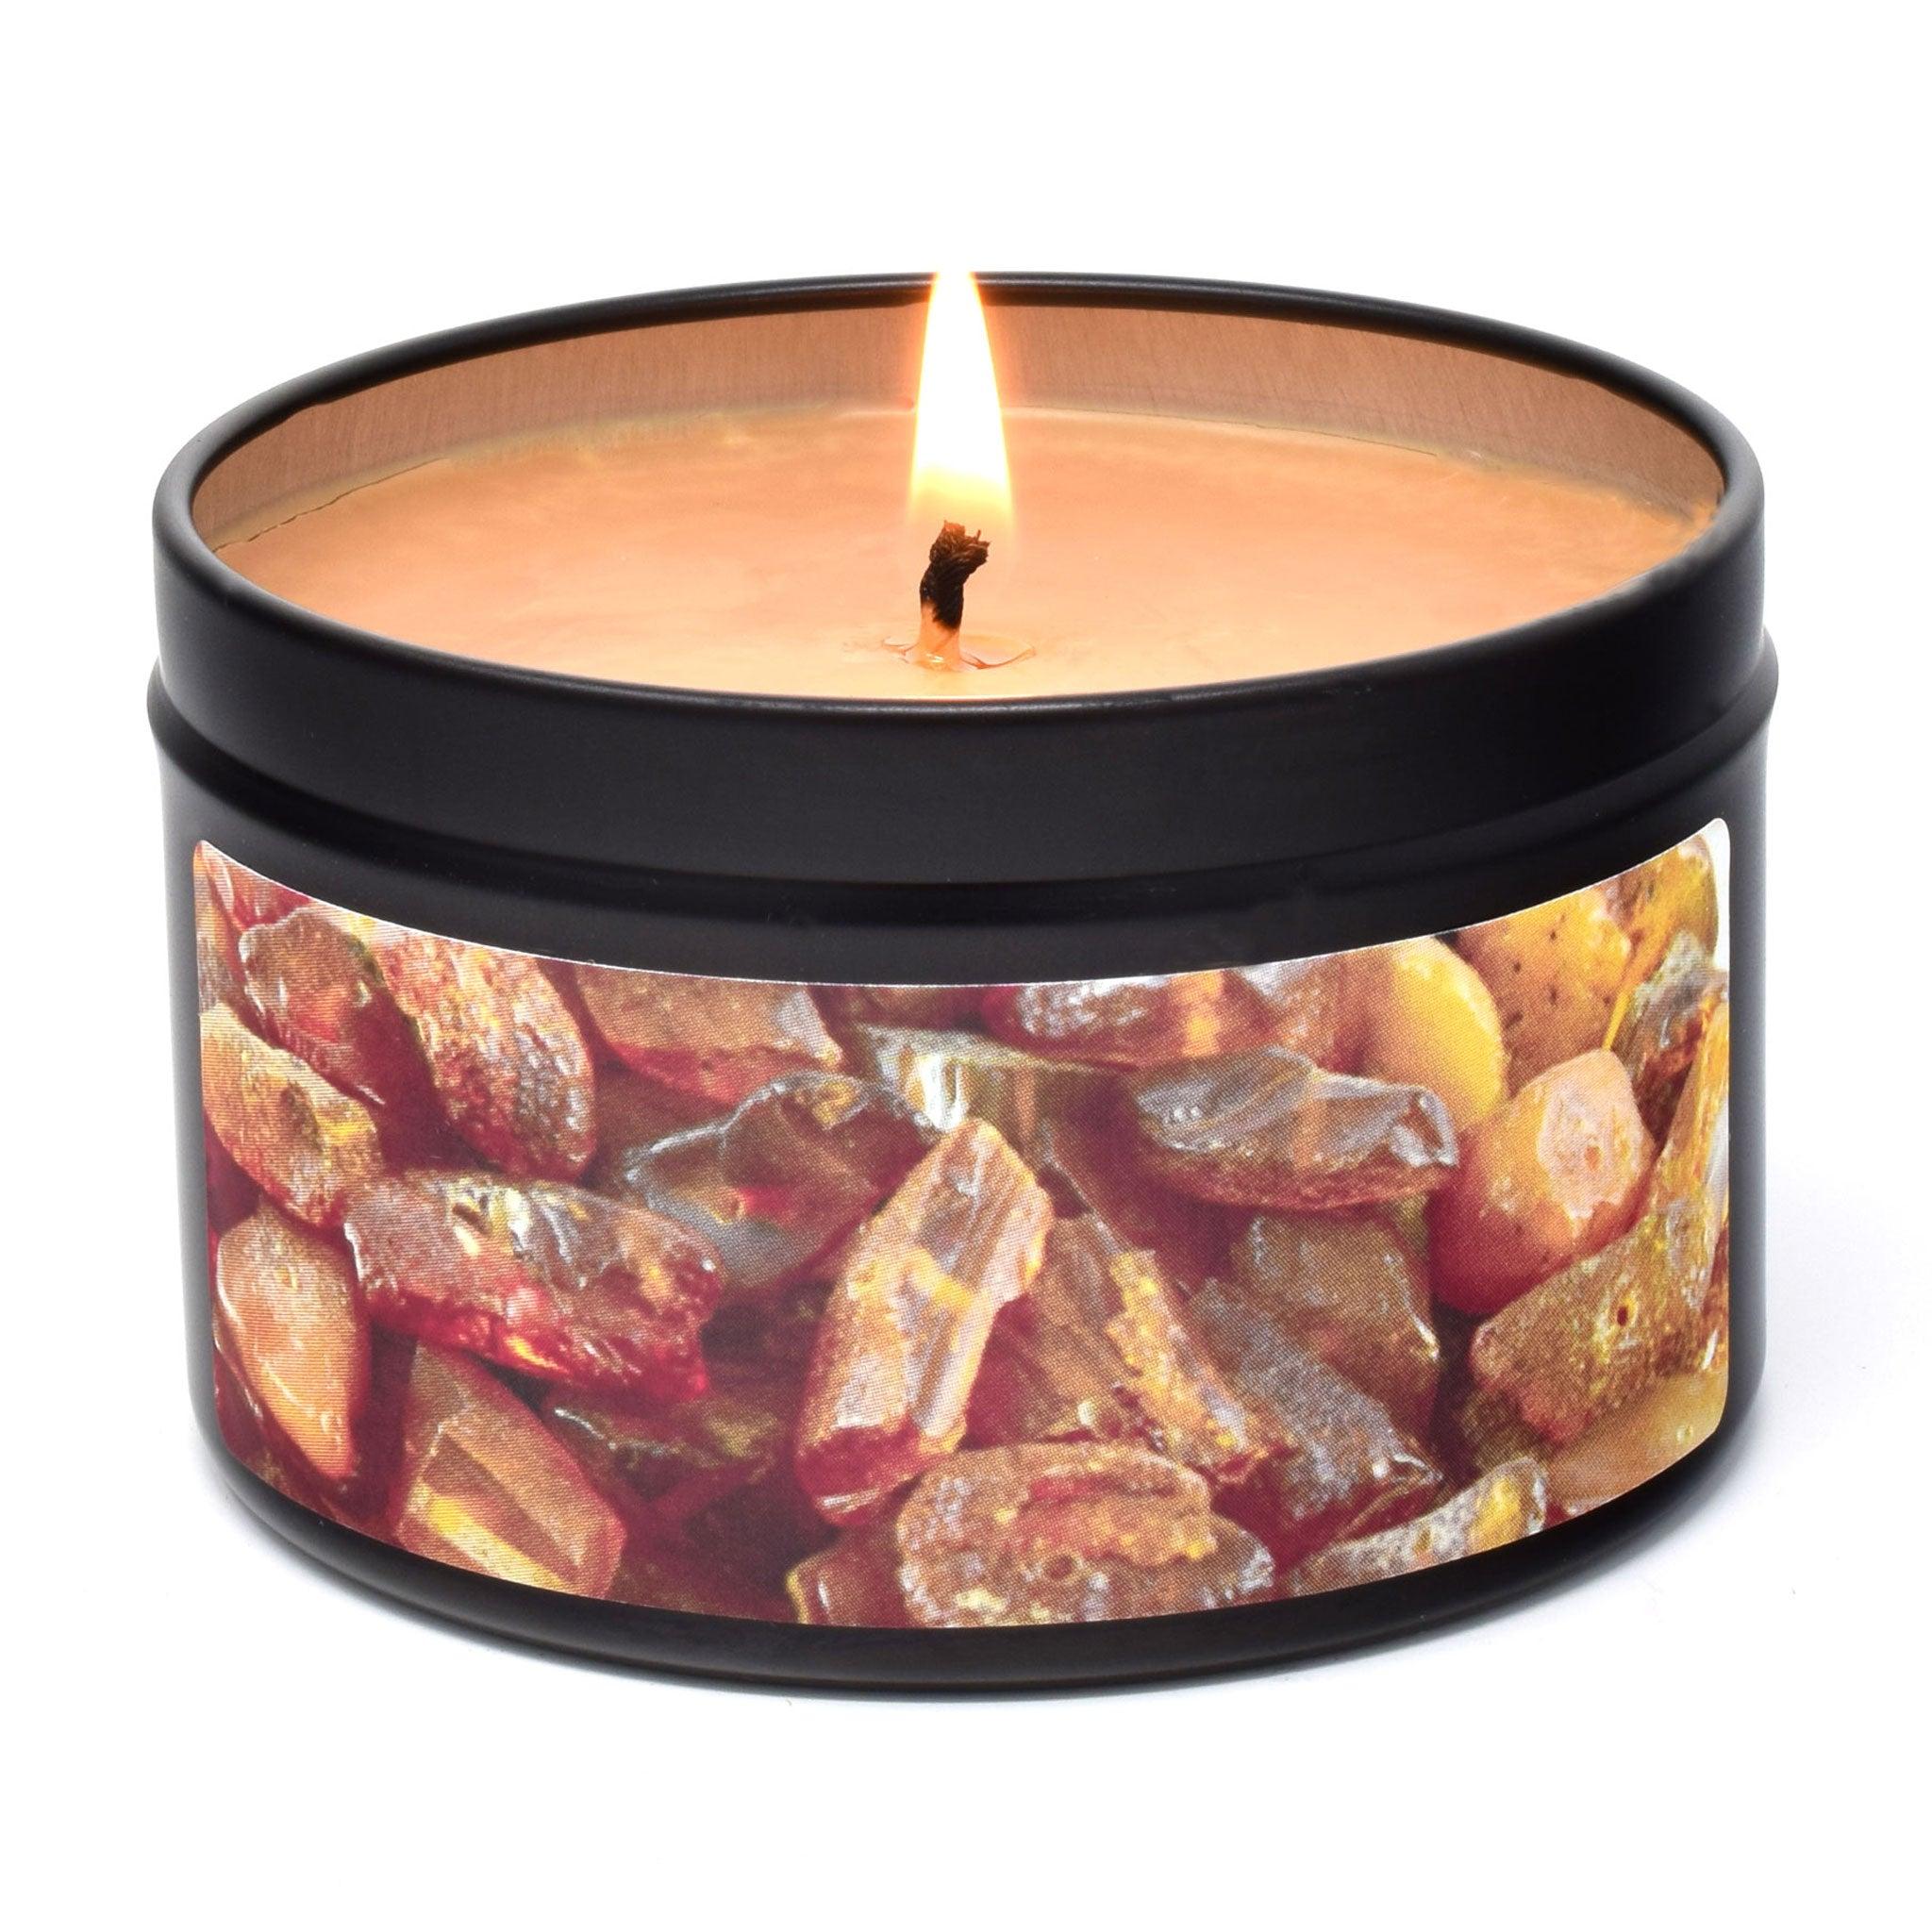 Amber Vanilla, 6oz Soy Candle Tin - Candeo Candle